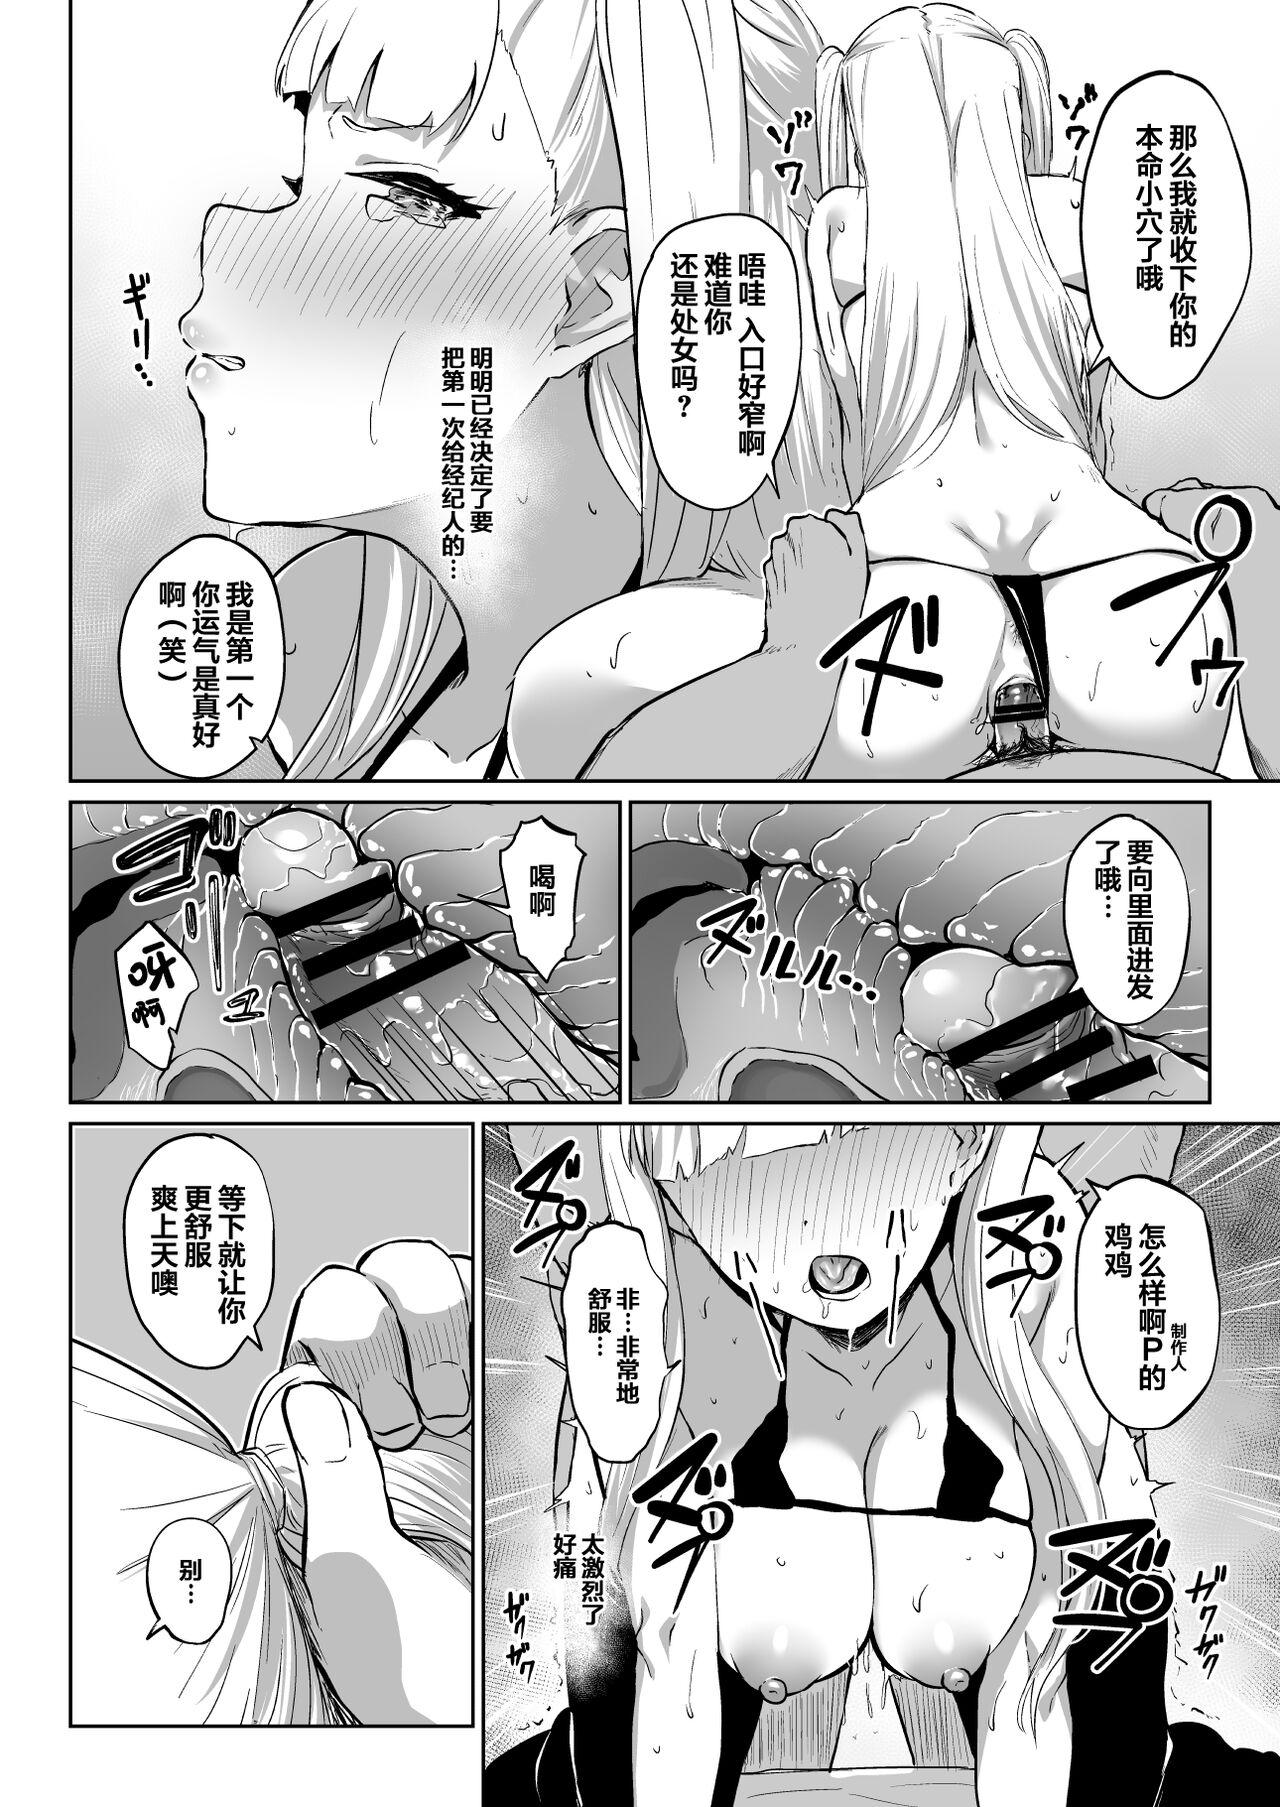 Africa ウエバス闇営業漫画 - Tokyo 7th sisters Star - Page 6